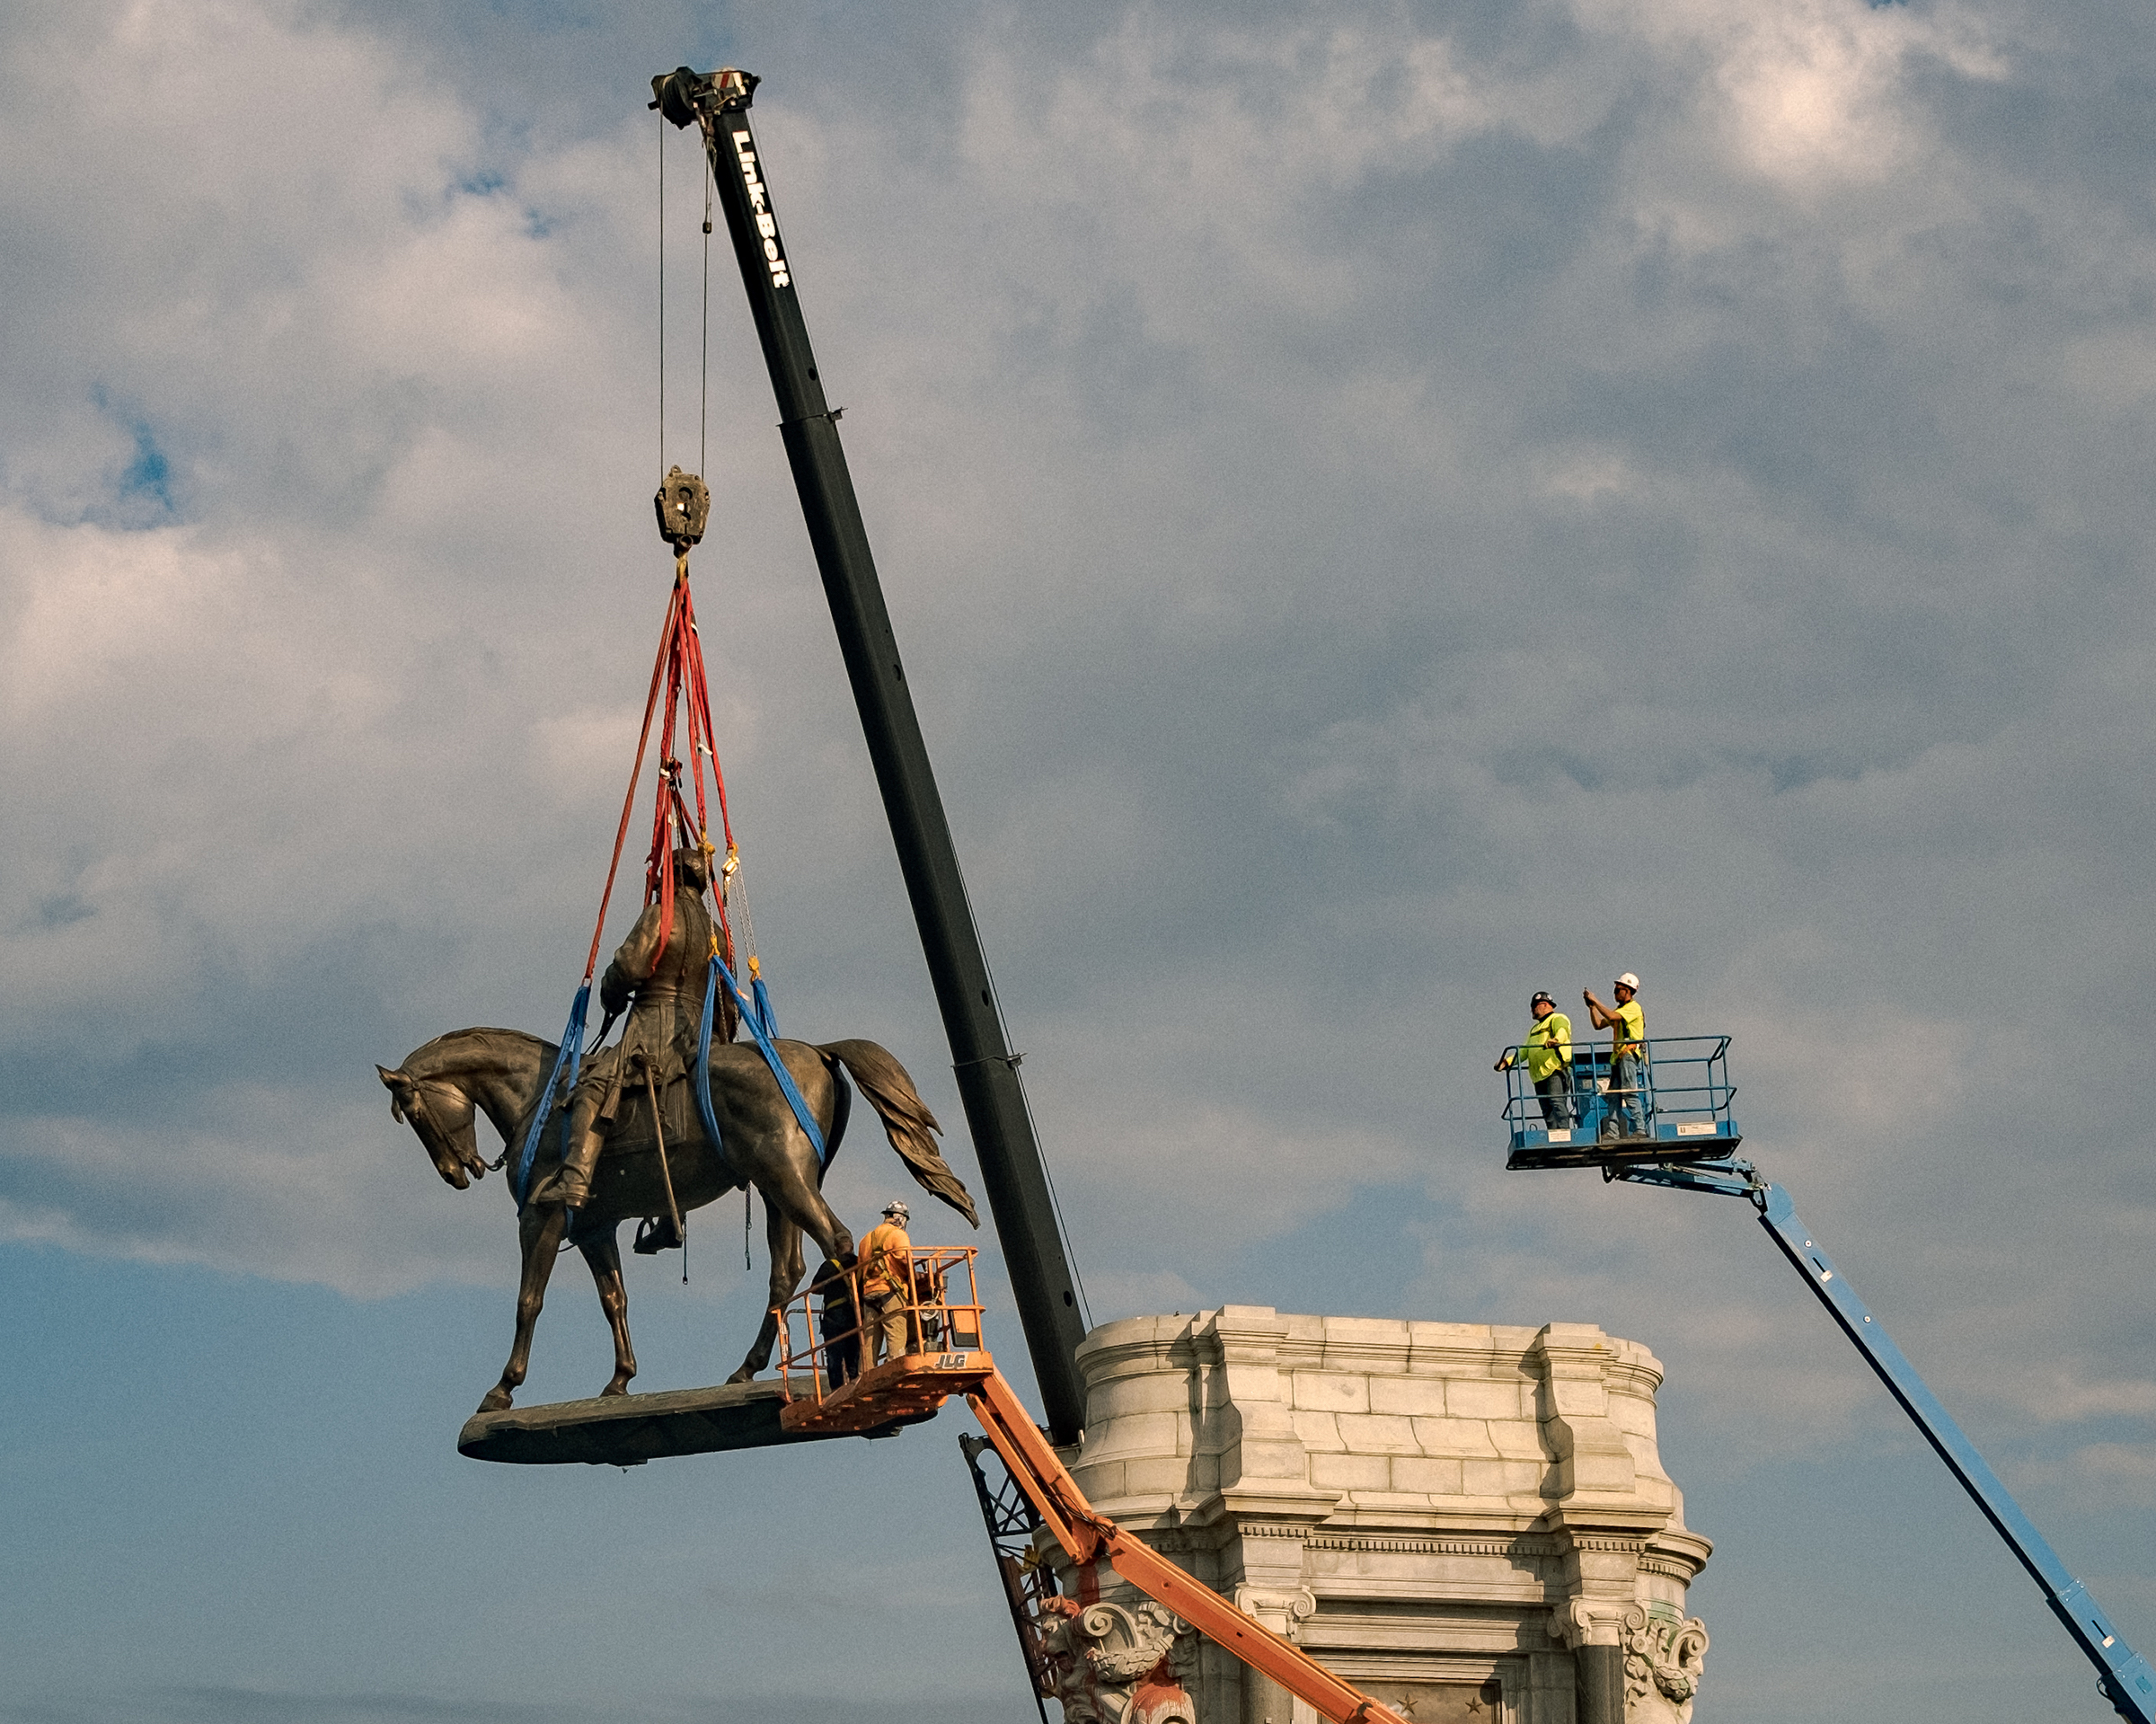 The statue of Robert E. Lee, the Confederate general and icon of a <a href="https://time.com/6096224/richmond-robert-e-lee-statue/">much mythologized chapter of American history</a>, is lowered from its plinth during its removal after 131 years in Richmond, Va., on Sept. 8. (Amr Alfiky—National Geographic/Pool/Getty Images)